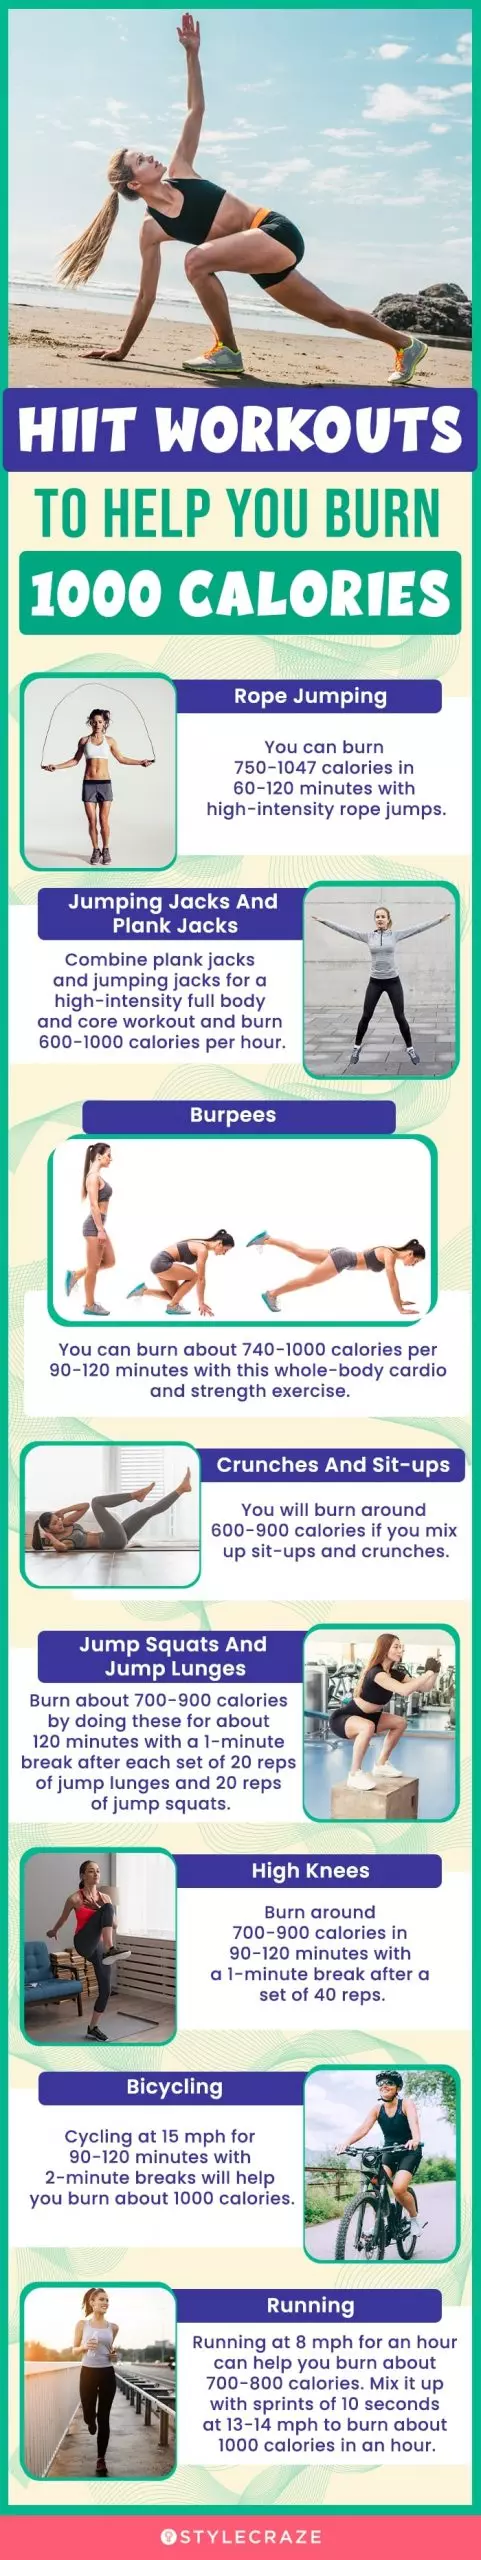 hiit workouts to help you burn 1000 calories (infographic)